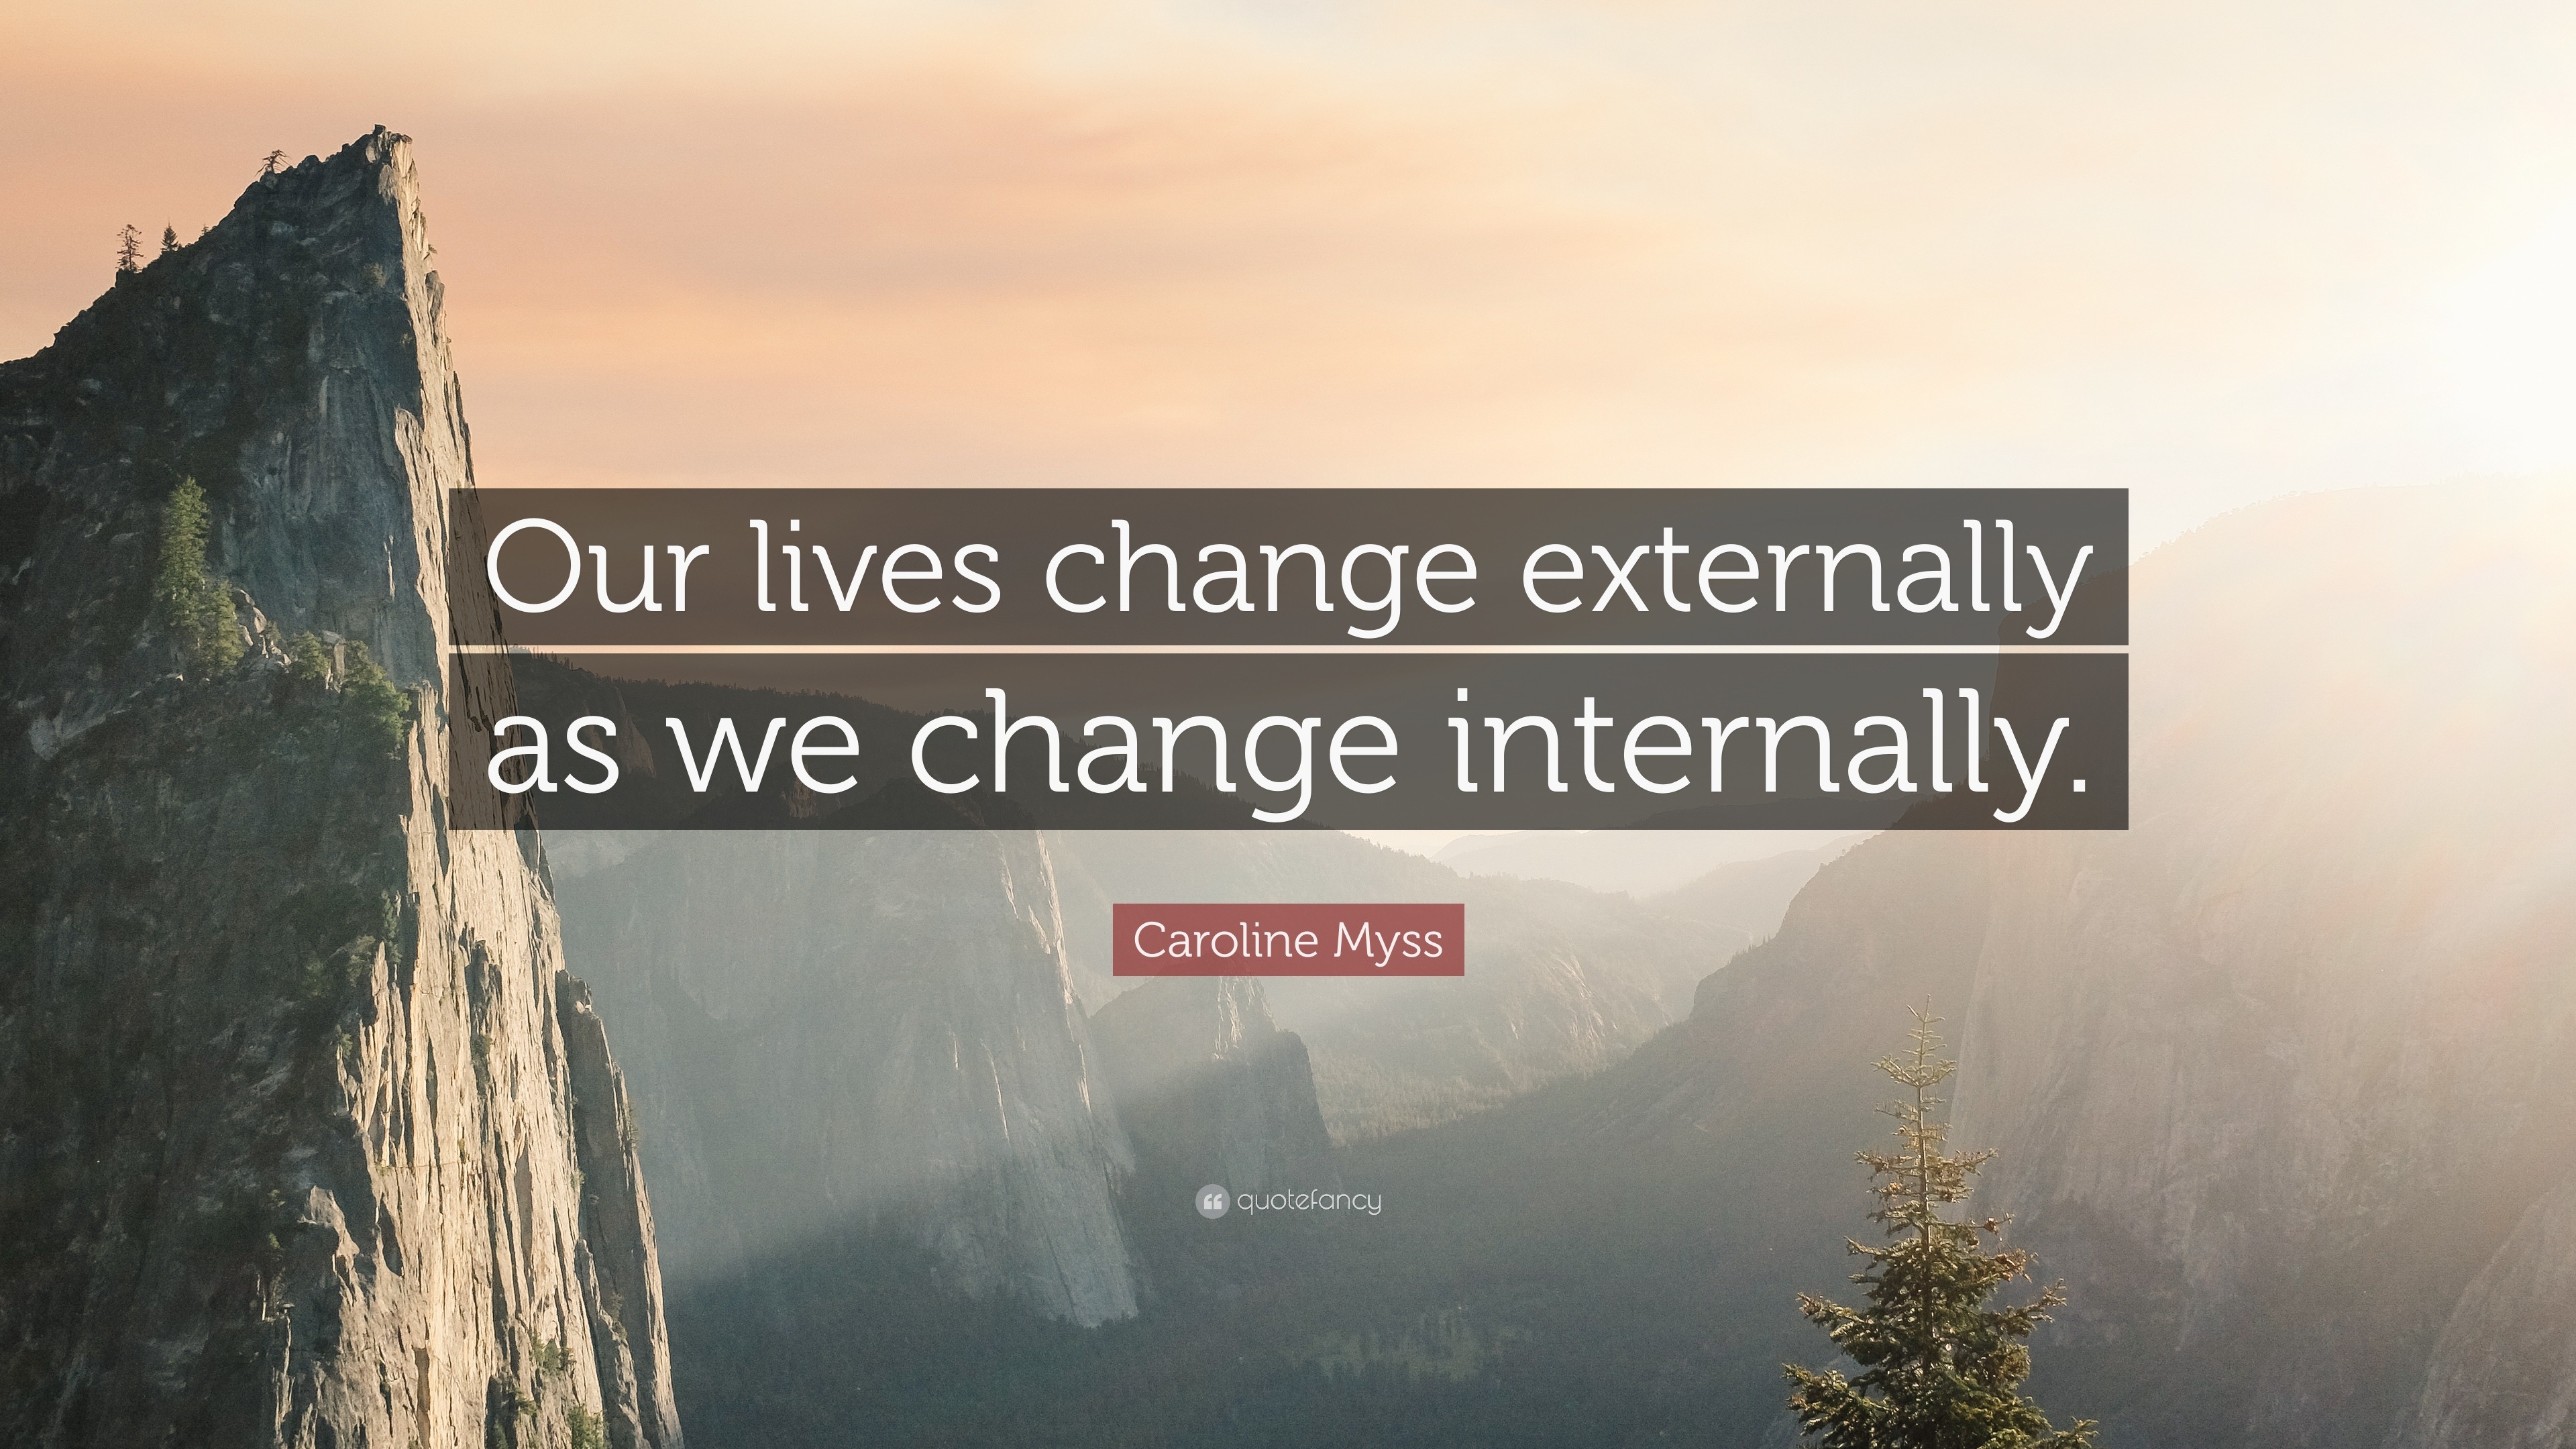 Caroline Myss Quote: “Our lives change externally as we change internally.”